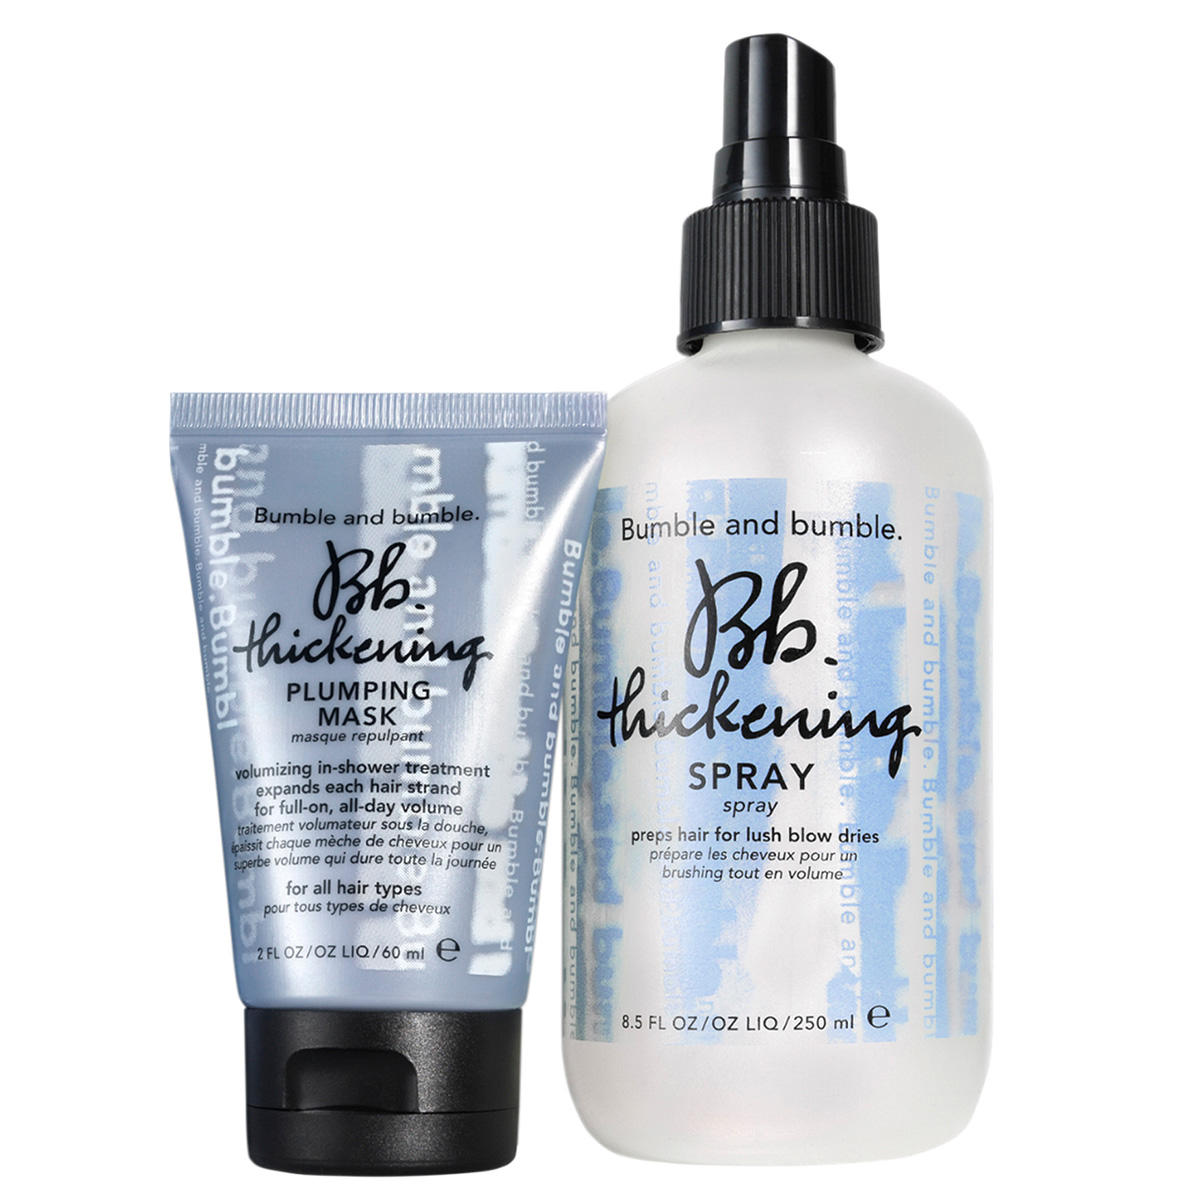 Bumble and bumble Bb. Thickening All About Volume Set  - 2